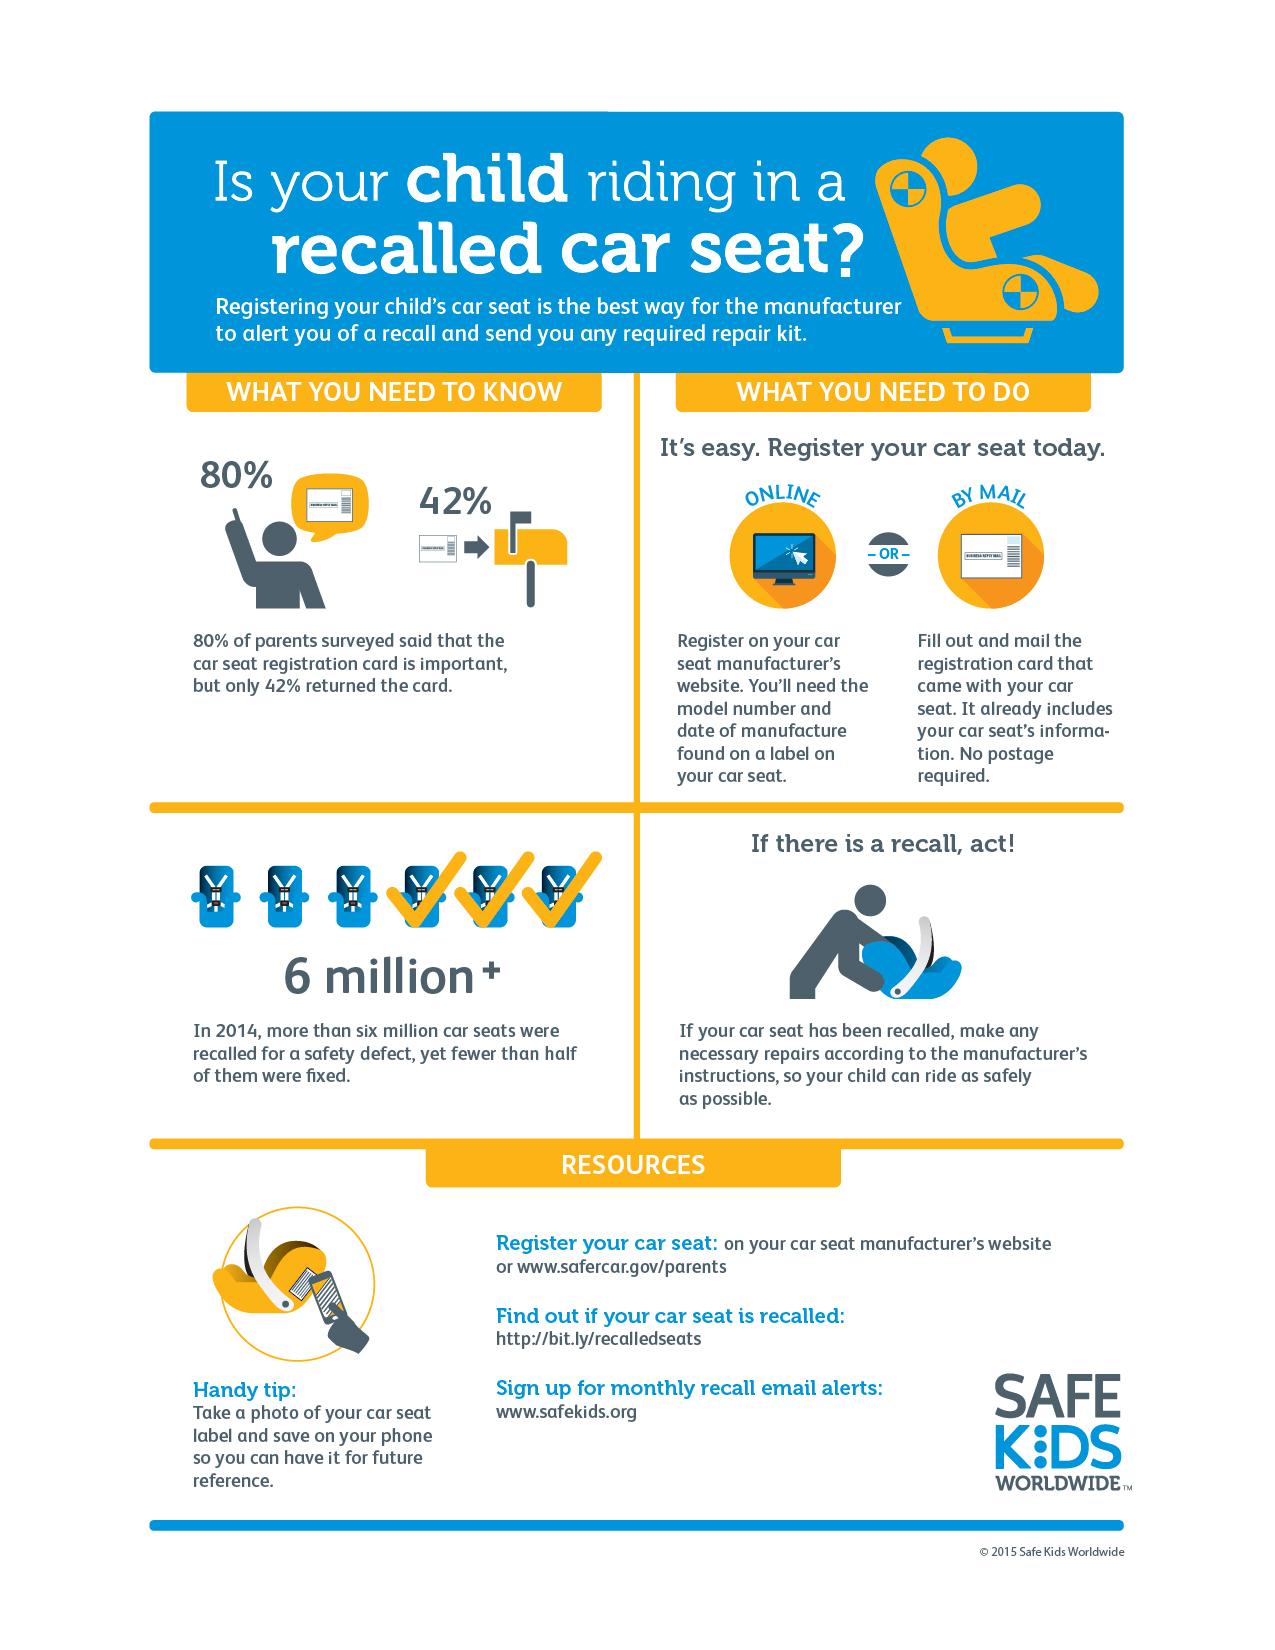 CPS car seat recall infographic 2015